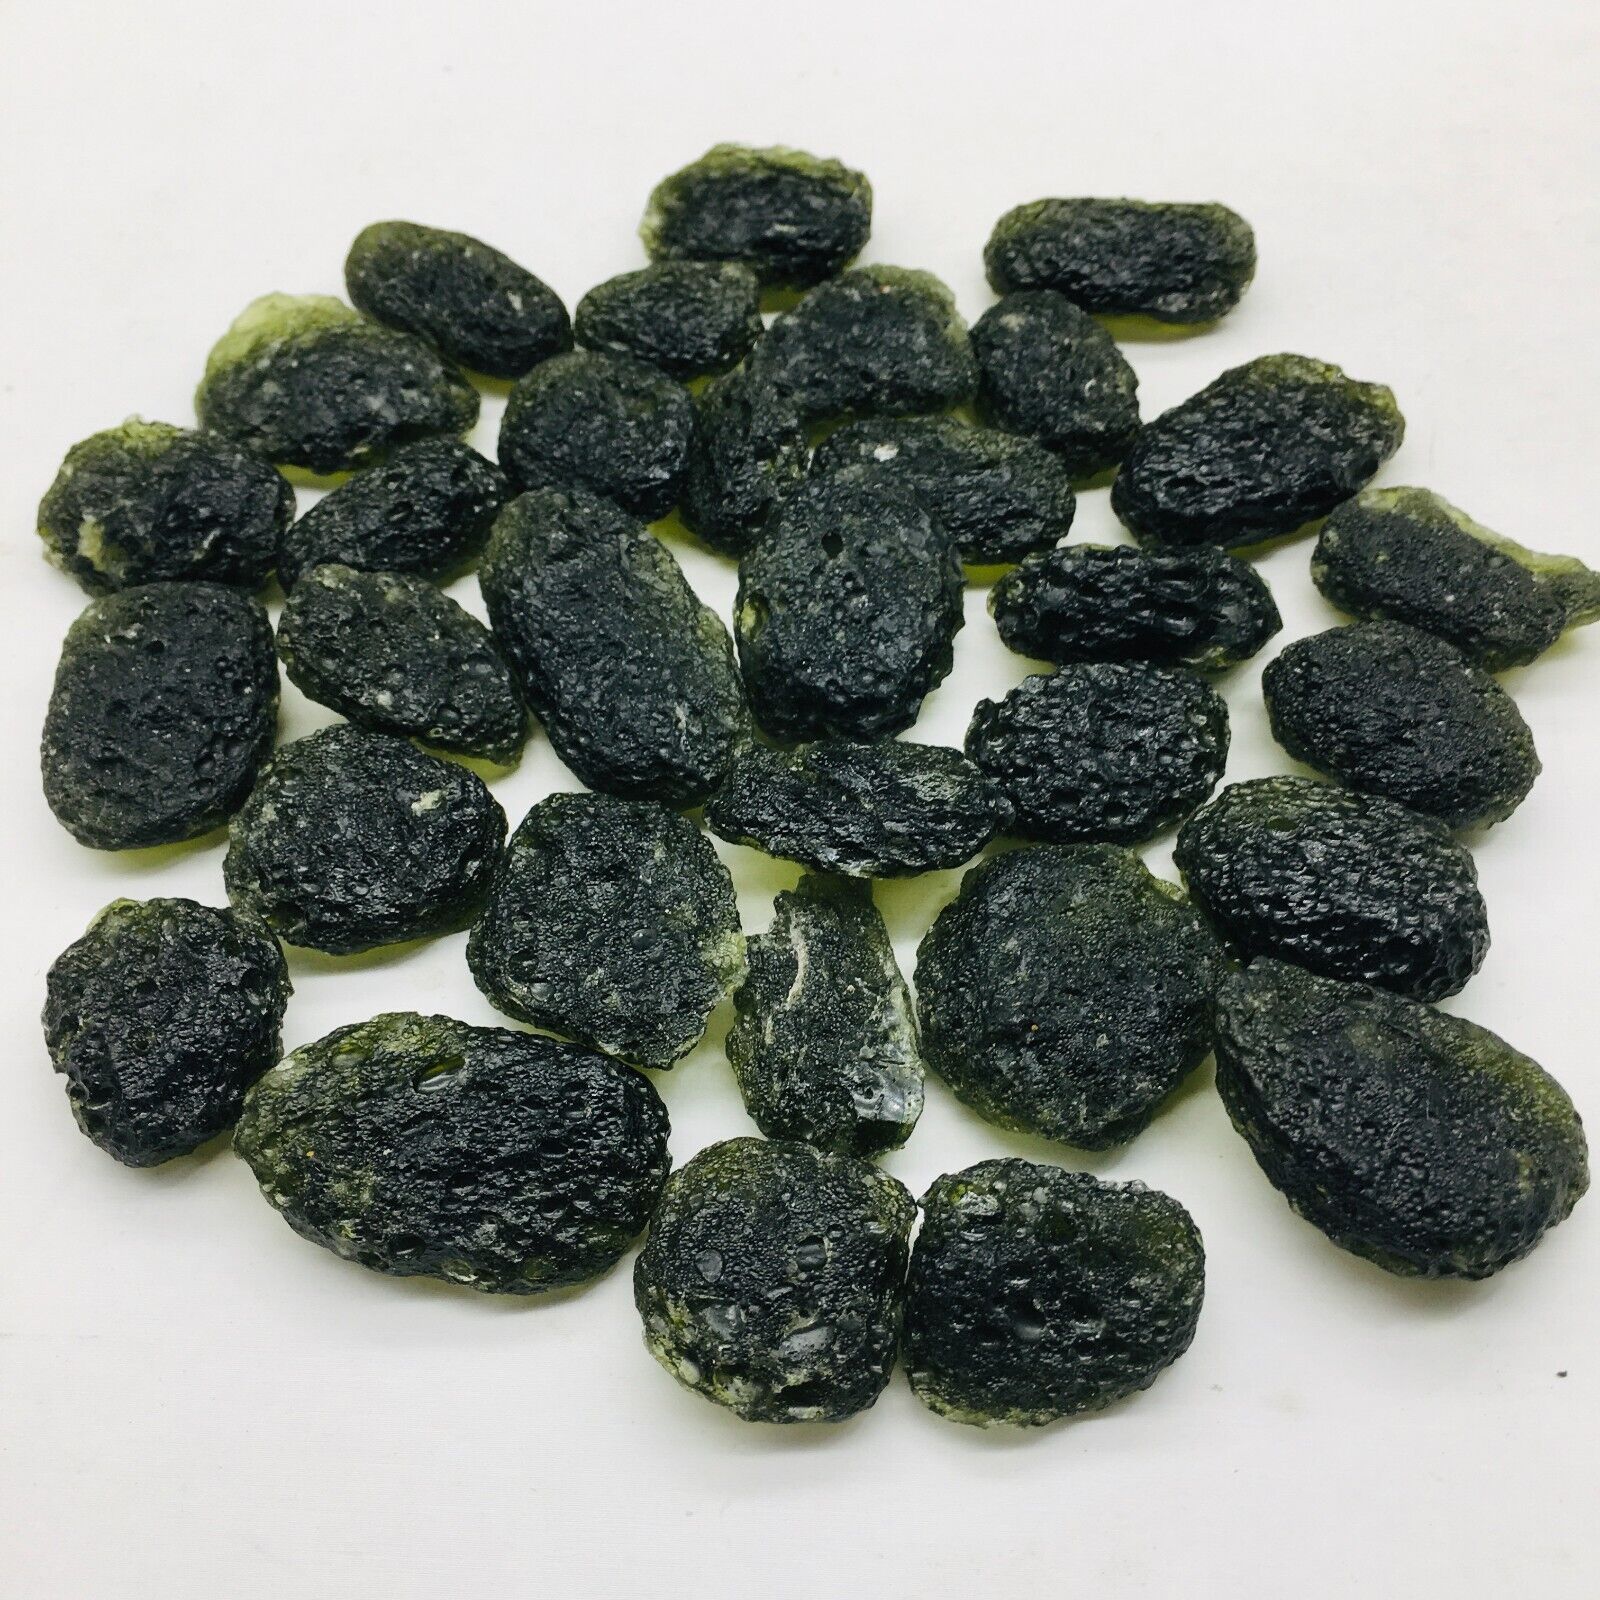 20PC MOLDAVITE METEORITE IMPACT GLASS CZECH - WITH CERTIFICATE OF AUTHENTICITY